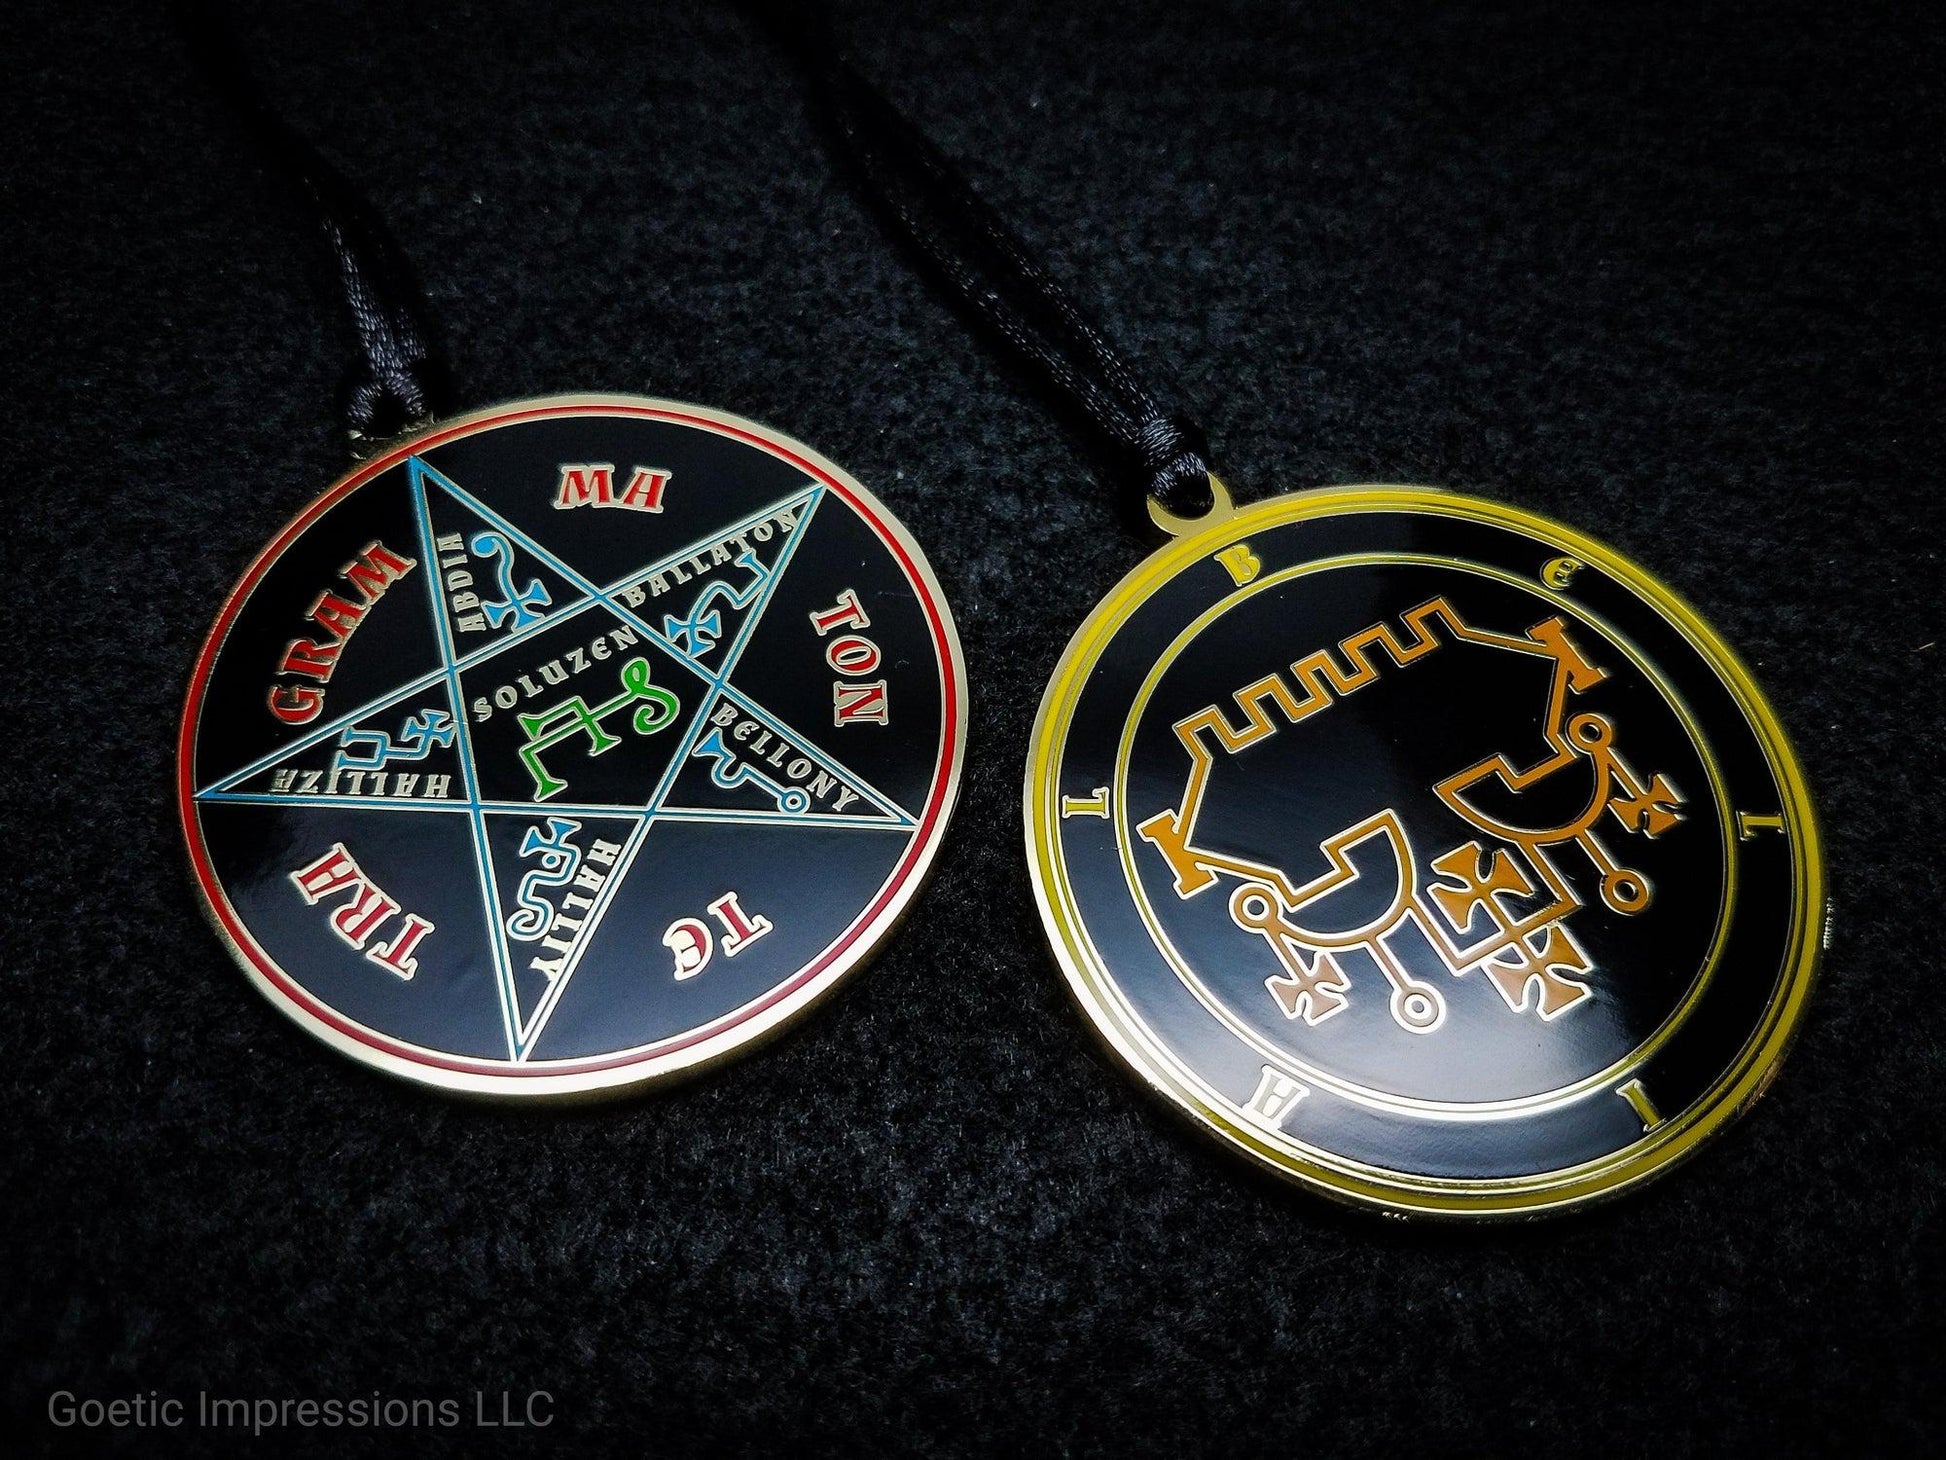 Ars Goetia Seal of Belial sigil medallion with Pentacle of Solomon on reverse side.